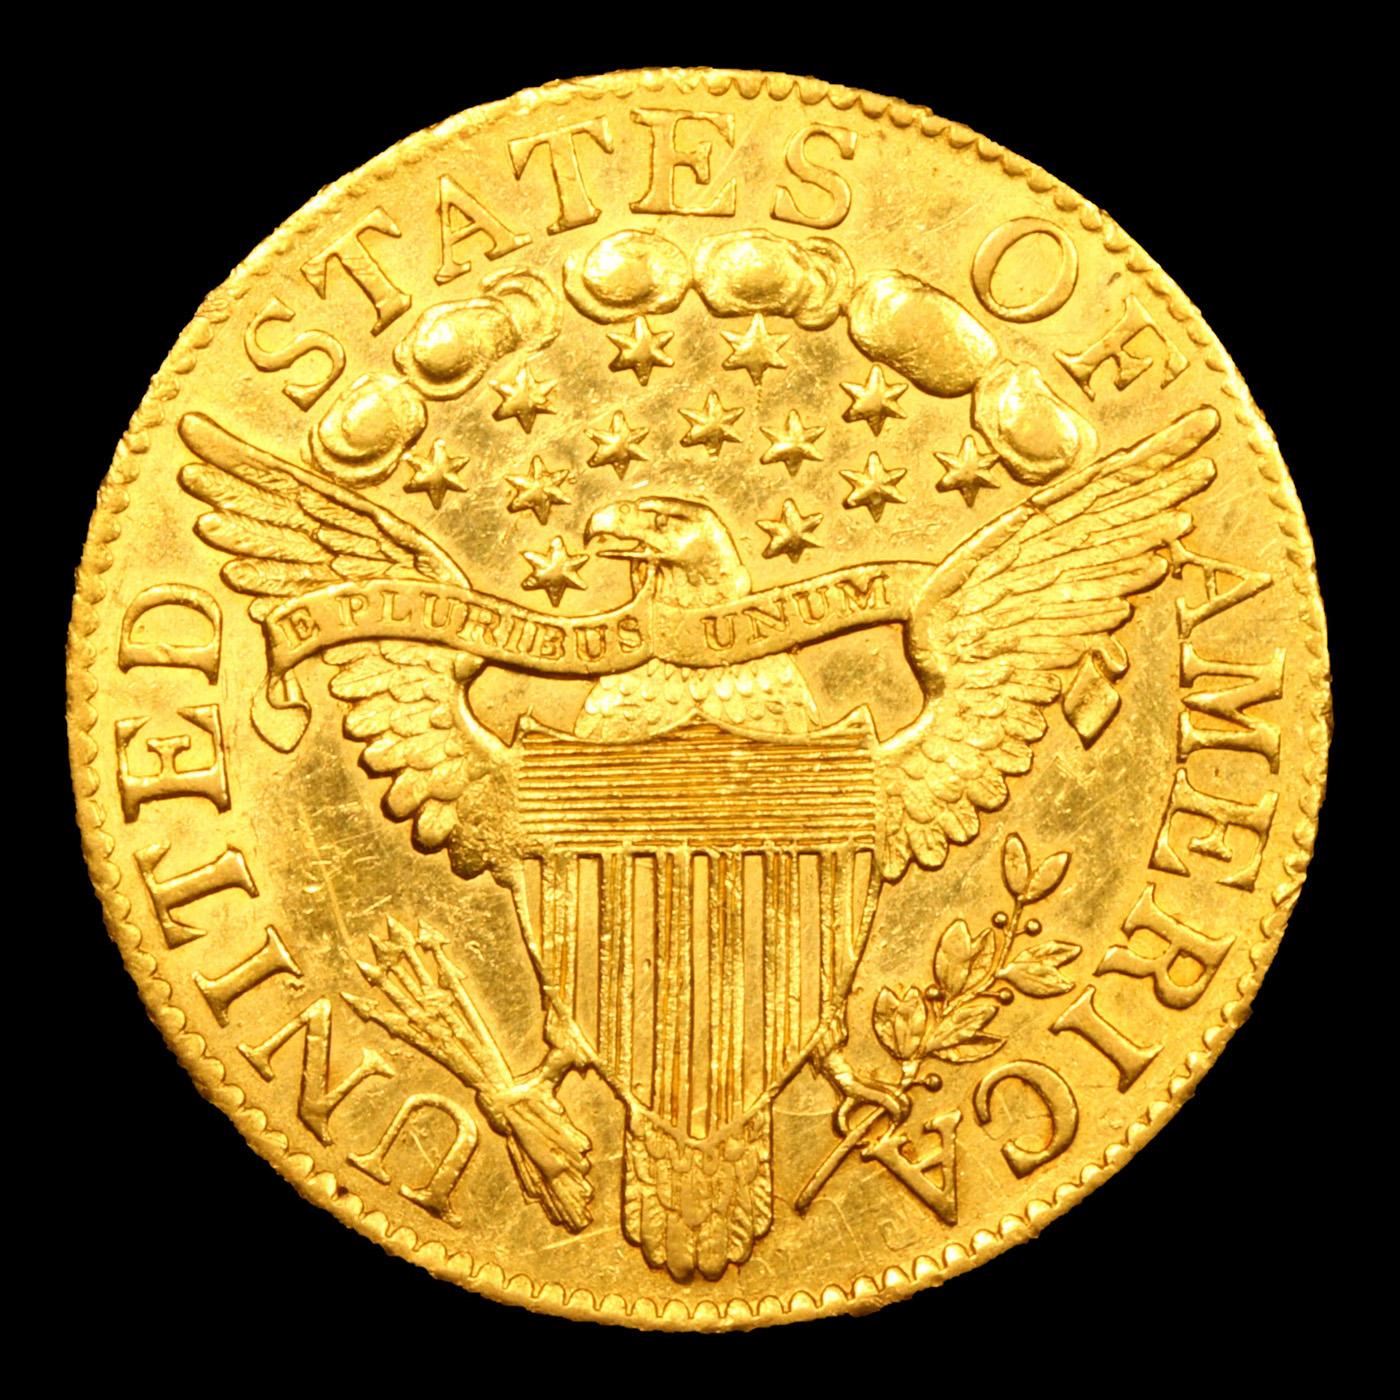 ***Auction Highlight*** 1805 Draped Bust Gold Half Eagle $5 Graded ms63 details By SEGS (fc)